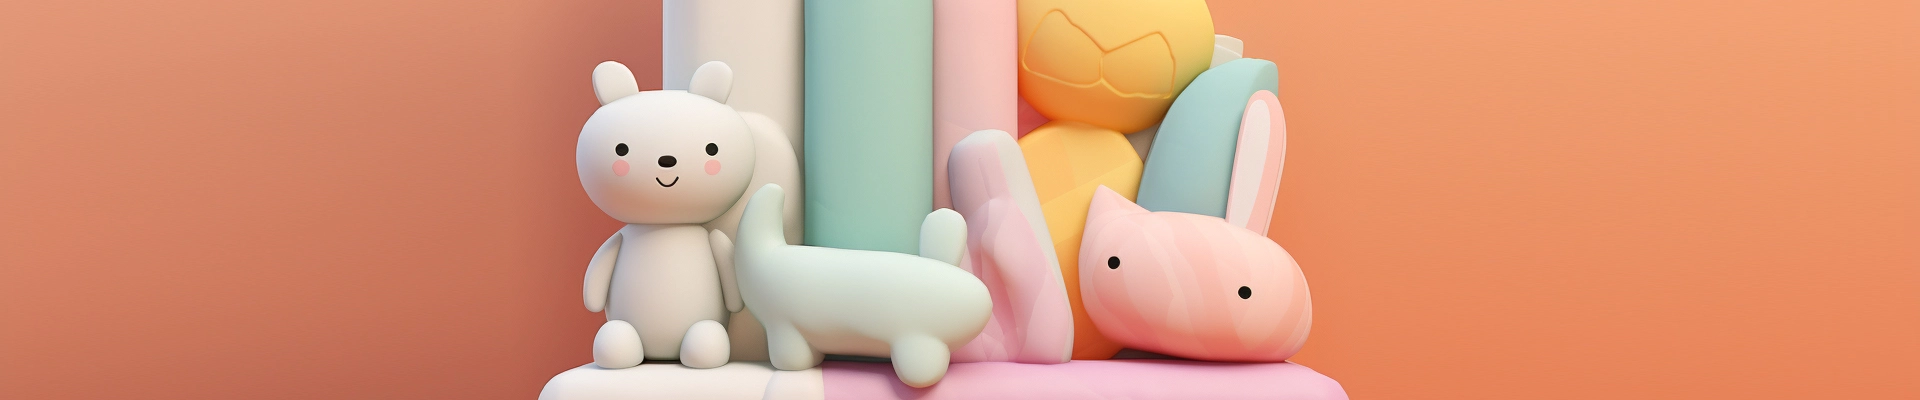 a delightful arrangement of pastel-colored toys and plush pillows, creating a cozy and inviting scene that exudes a sense of playfulness and comfort